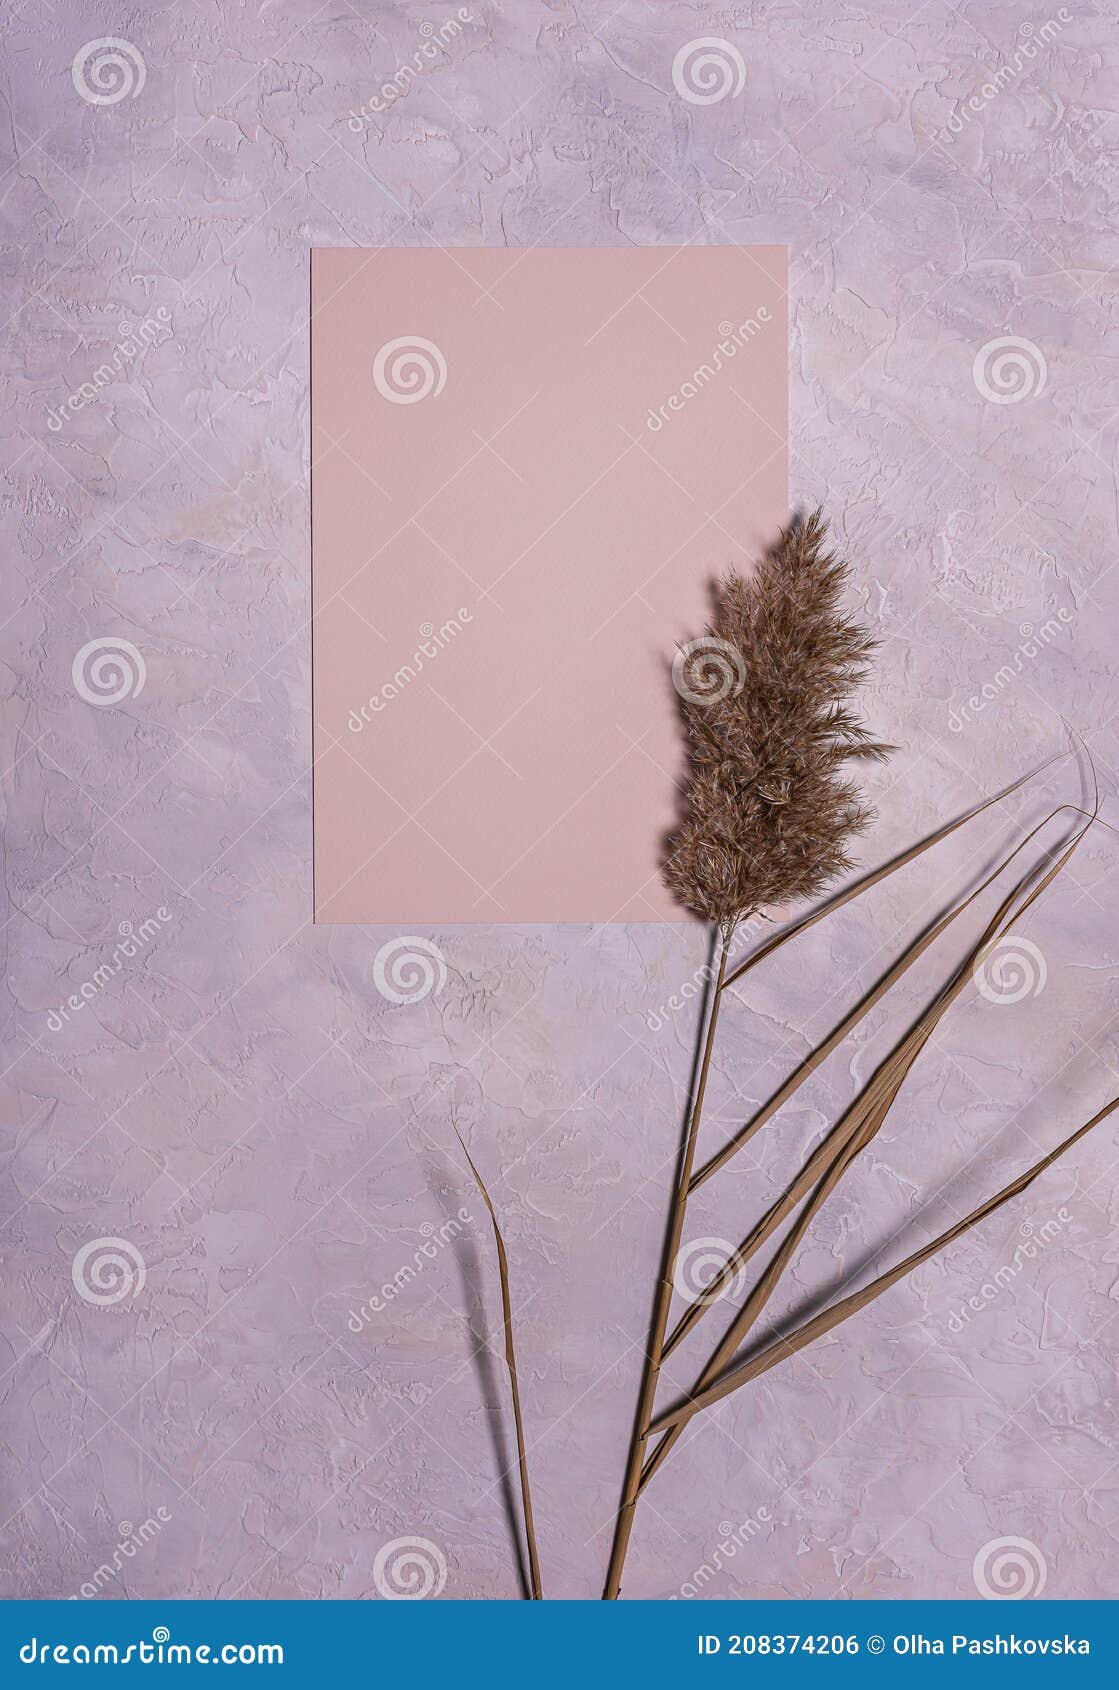 https://thumbs.dreamstime.com/z/dried-reed-flower-peach-colored-paper-dusk-concrete-natural-dried-reed-flowers-blank-peach-colored-textured-paper-sheet-208374206.jpg